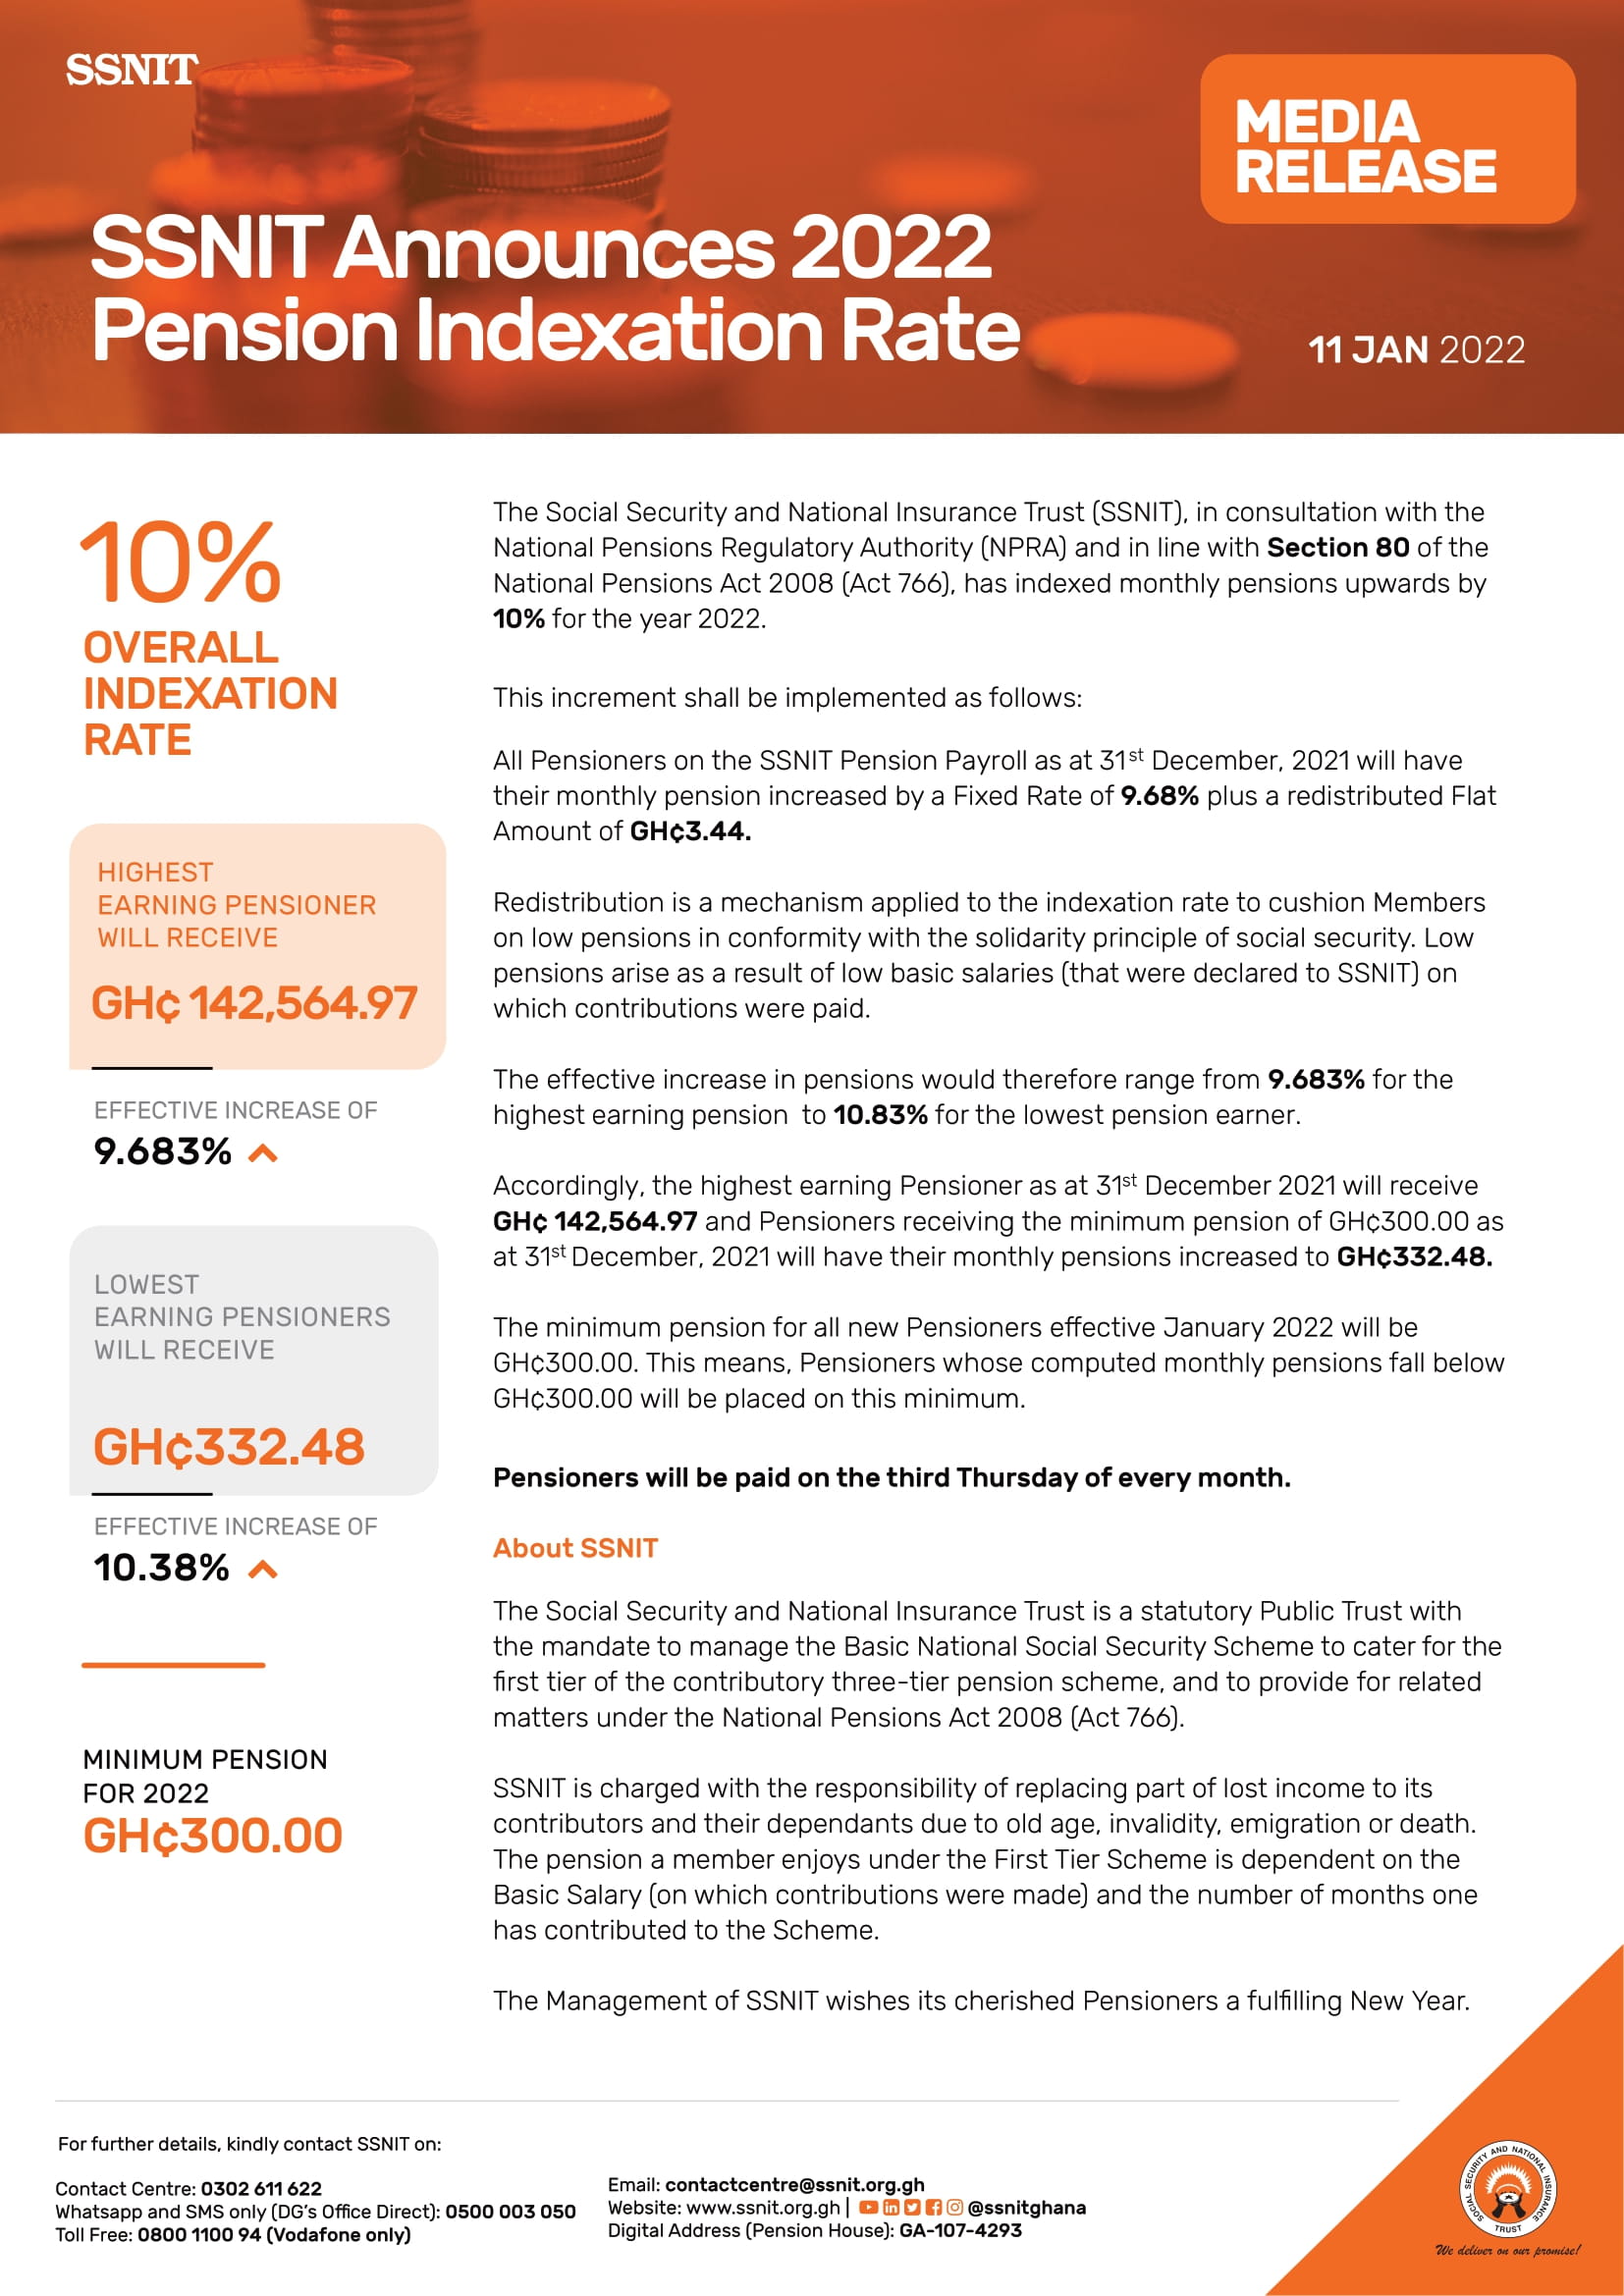 SSNIT increases 2022 pension by 10%